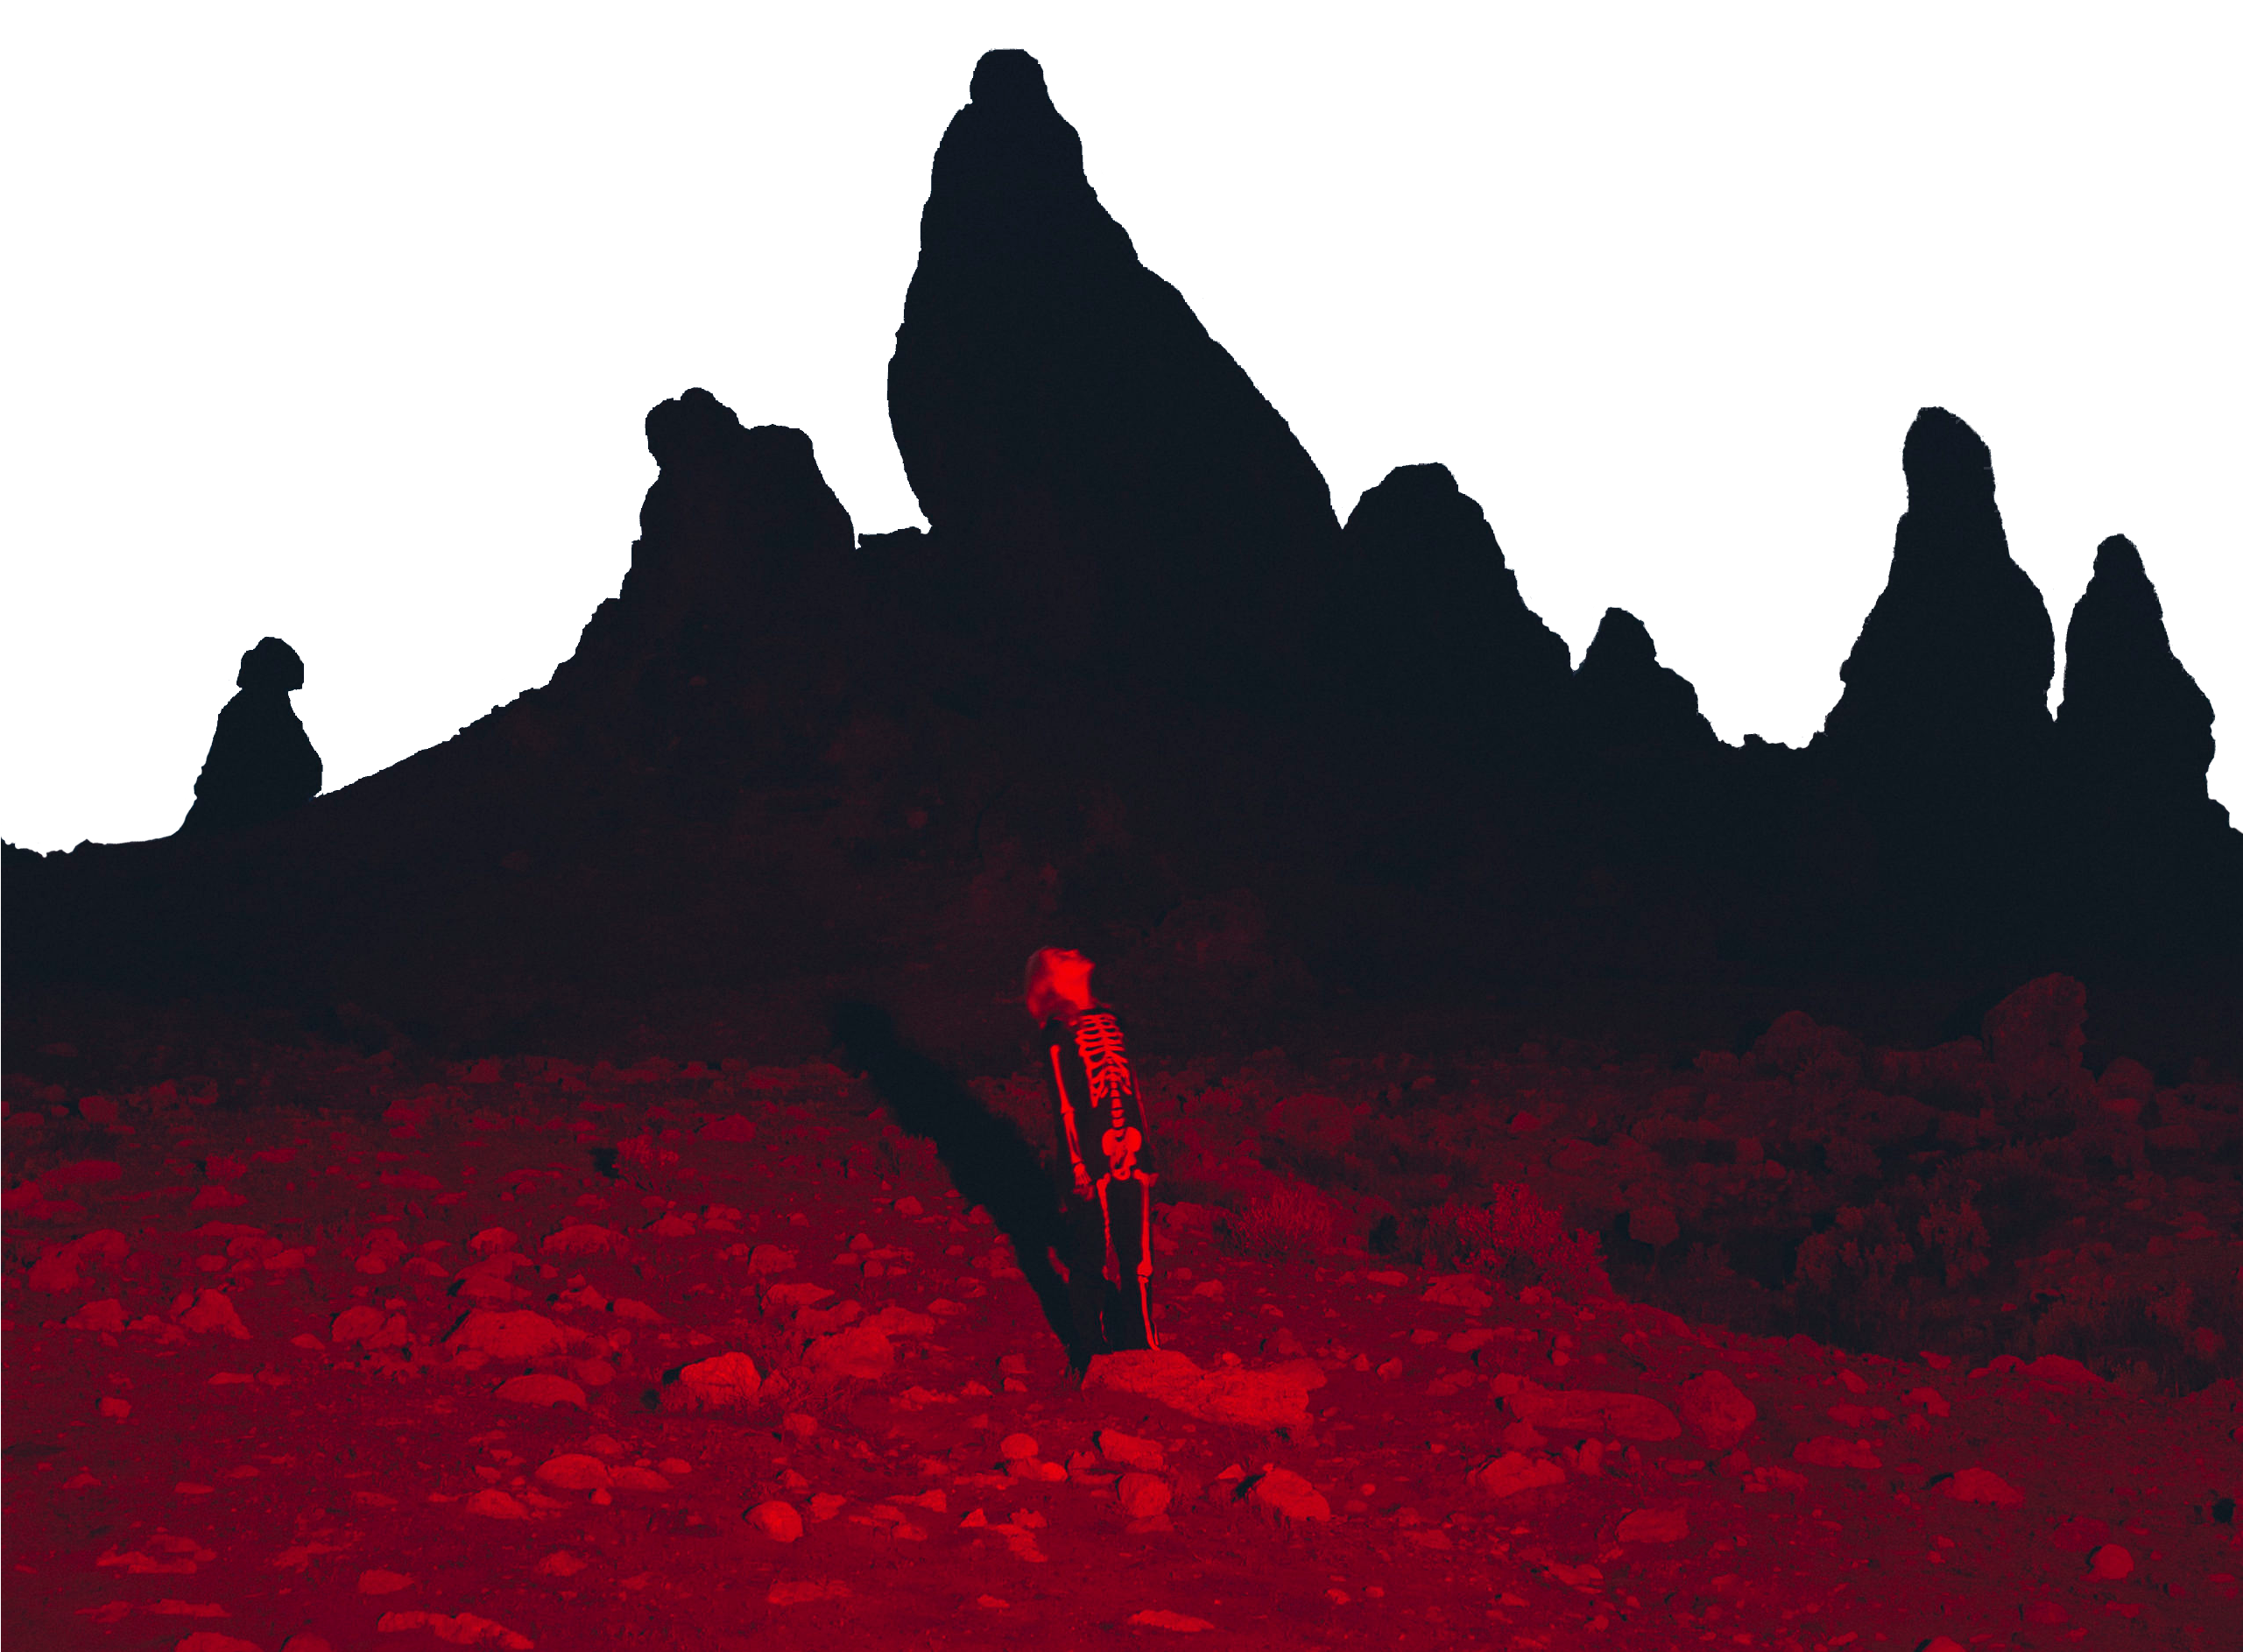 Cover of Phoebe Bridger's Punisher - A mountainous landscape bathed in red. A woman stands in the center looking up at the night sky.